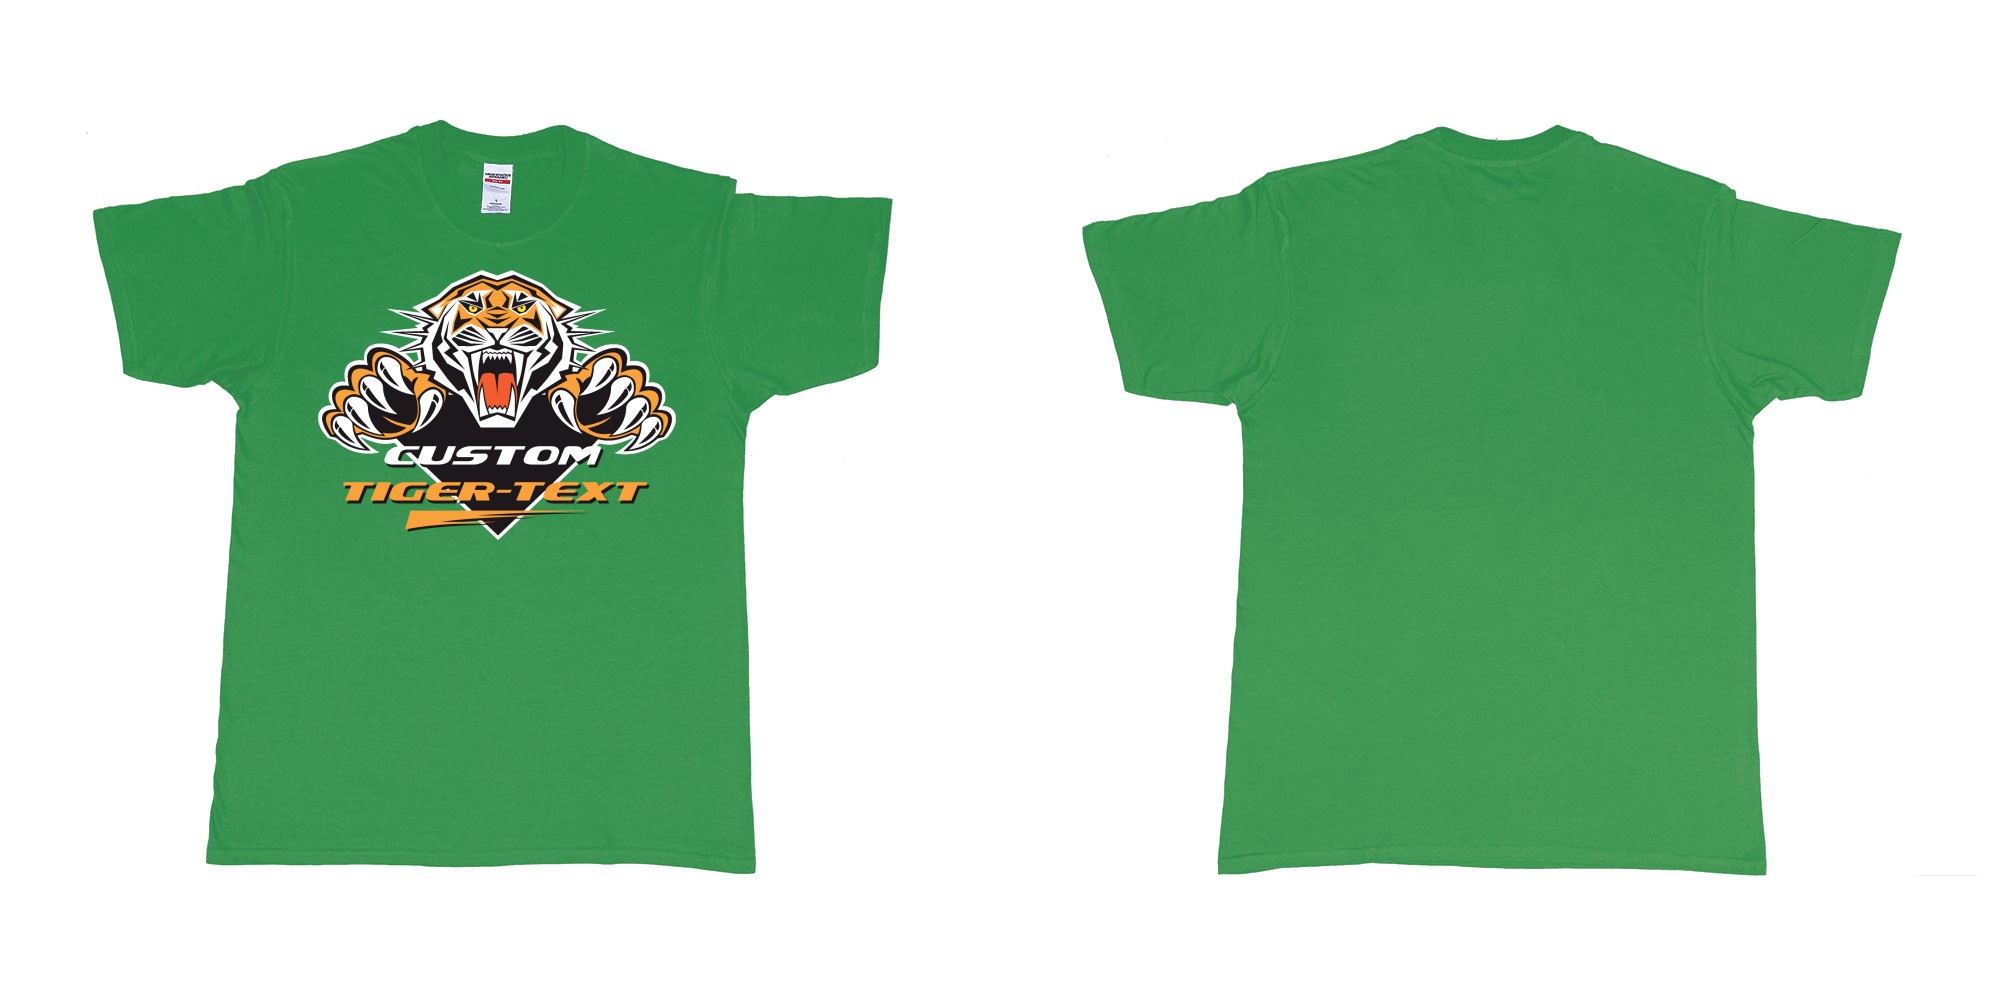 Custom tshirt design the wests tigers sydney national rugby league custom tshirt print in fabric color irish-green choice your own text made in Bali by The Pirate Way